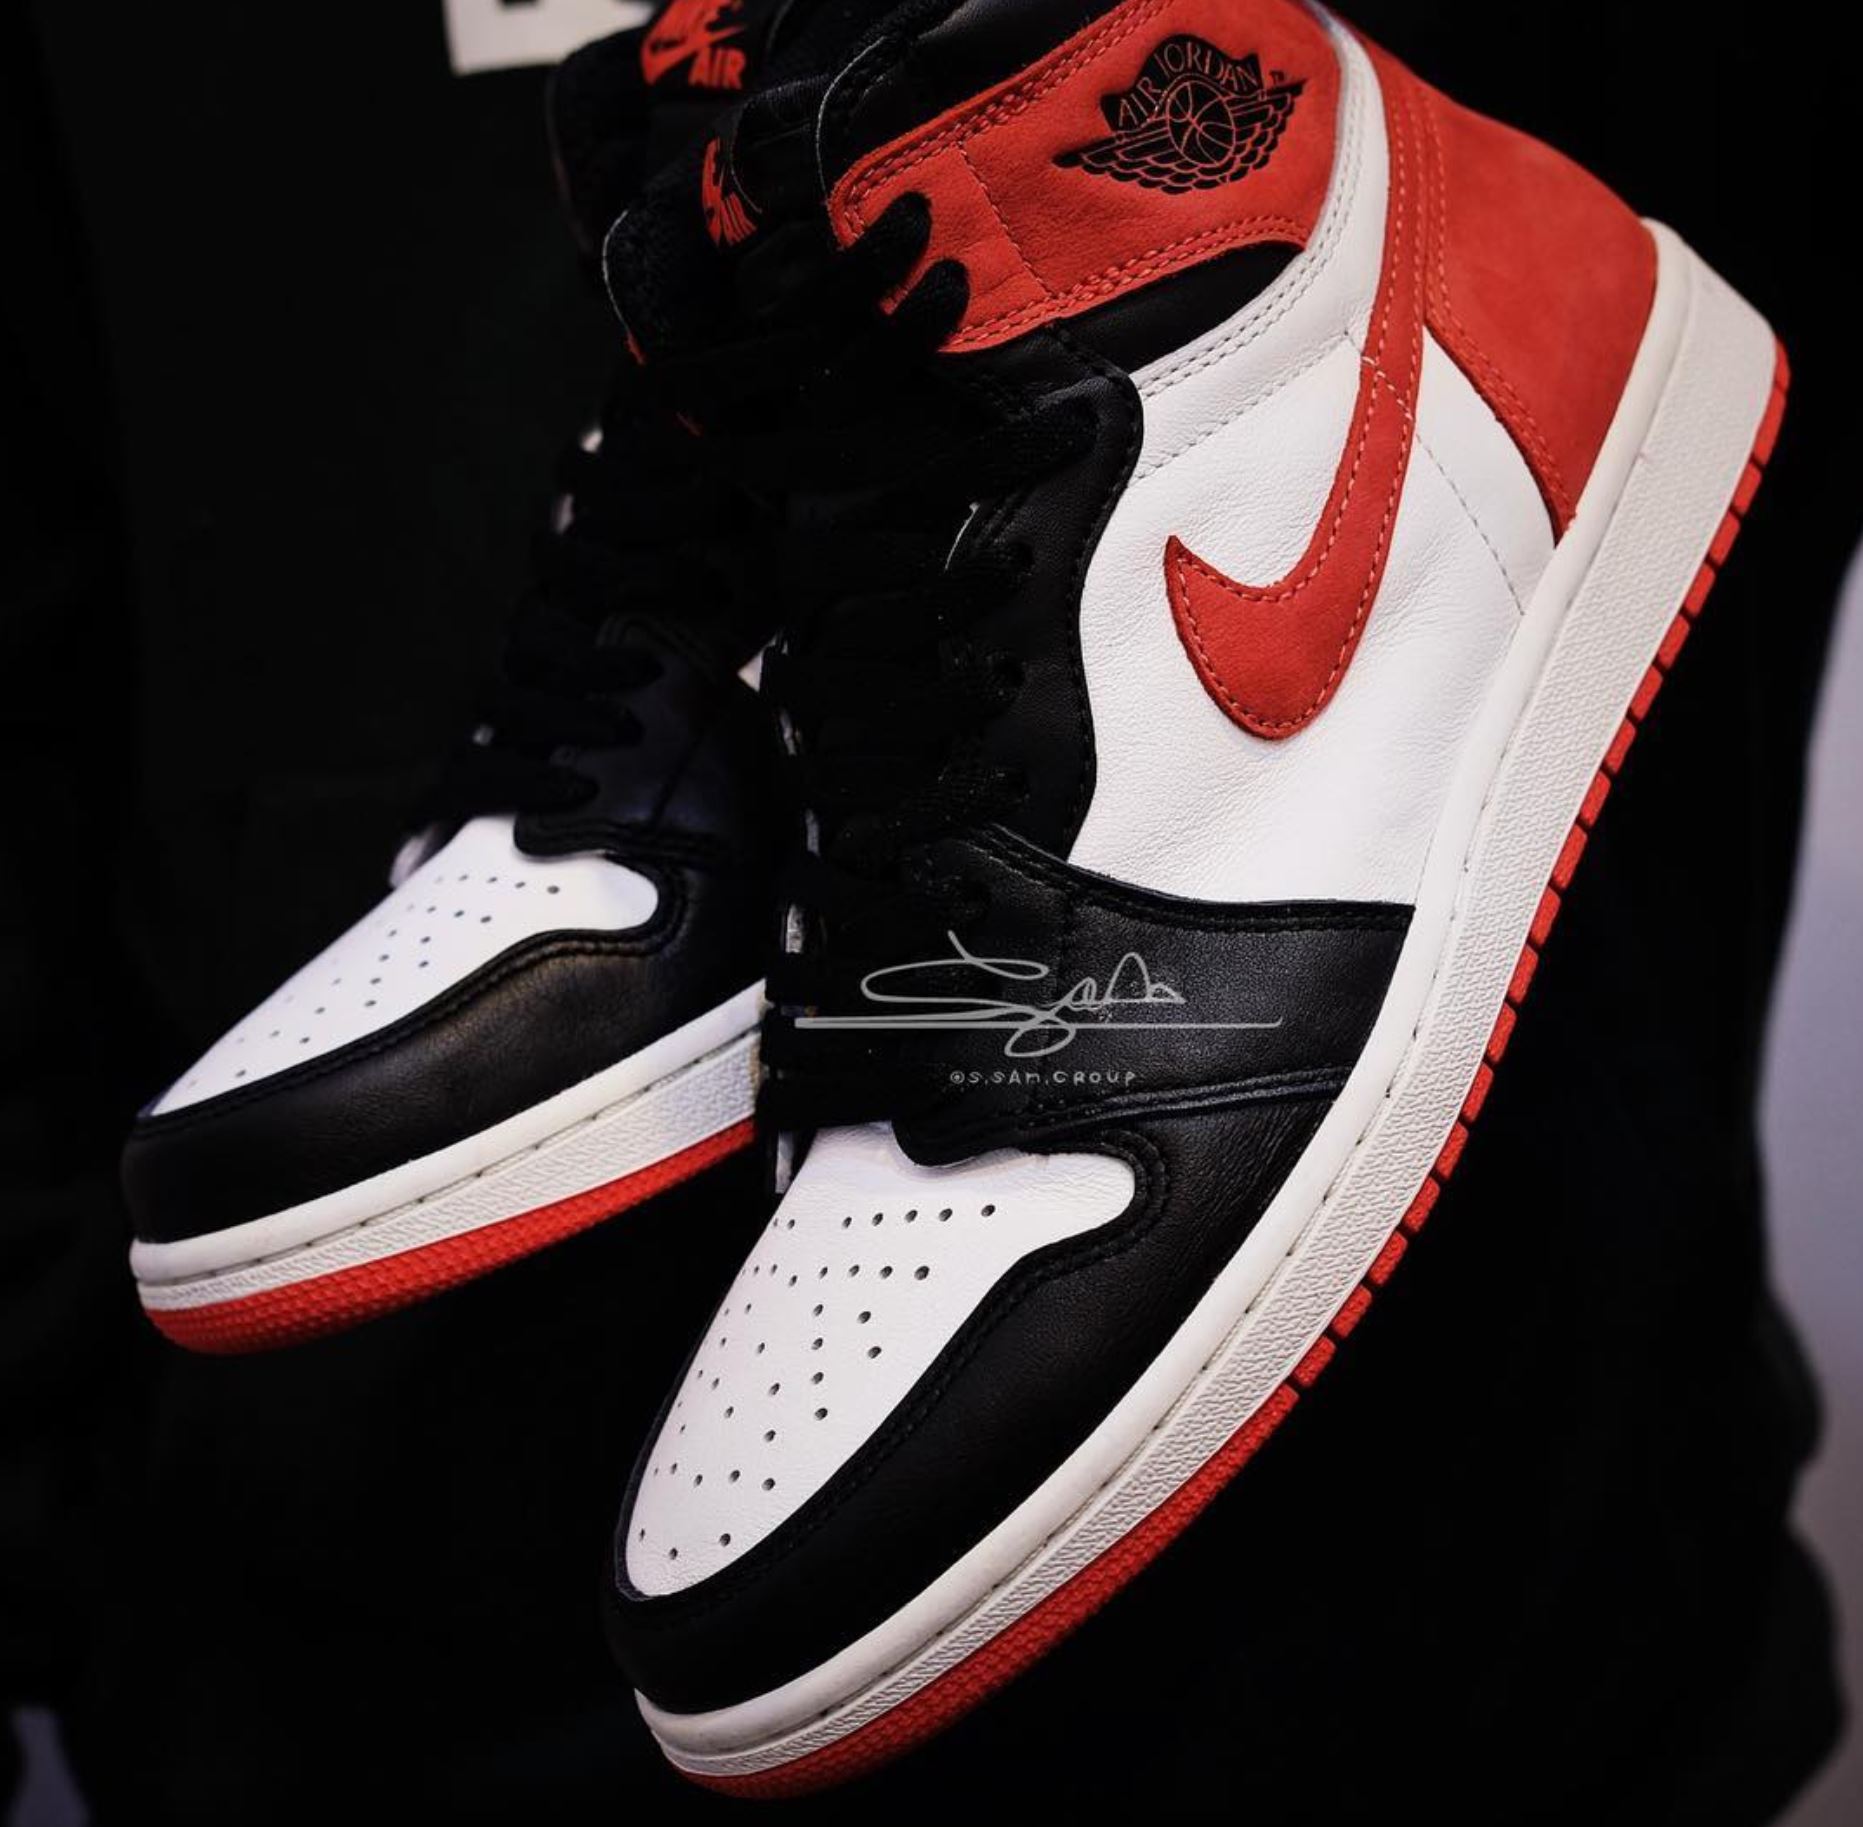 frase Guiño inercia The Air Jordan 1 '6 Rings' Flaunts Suede Accents - WearTesters